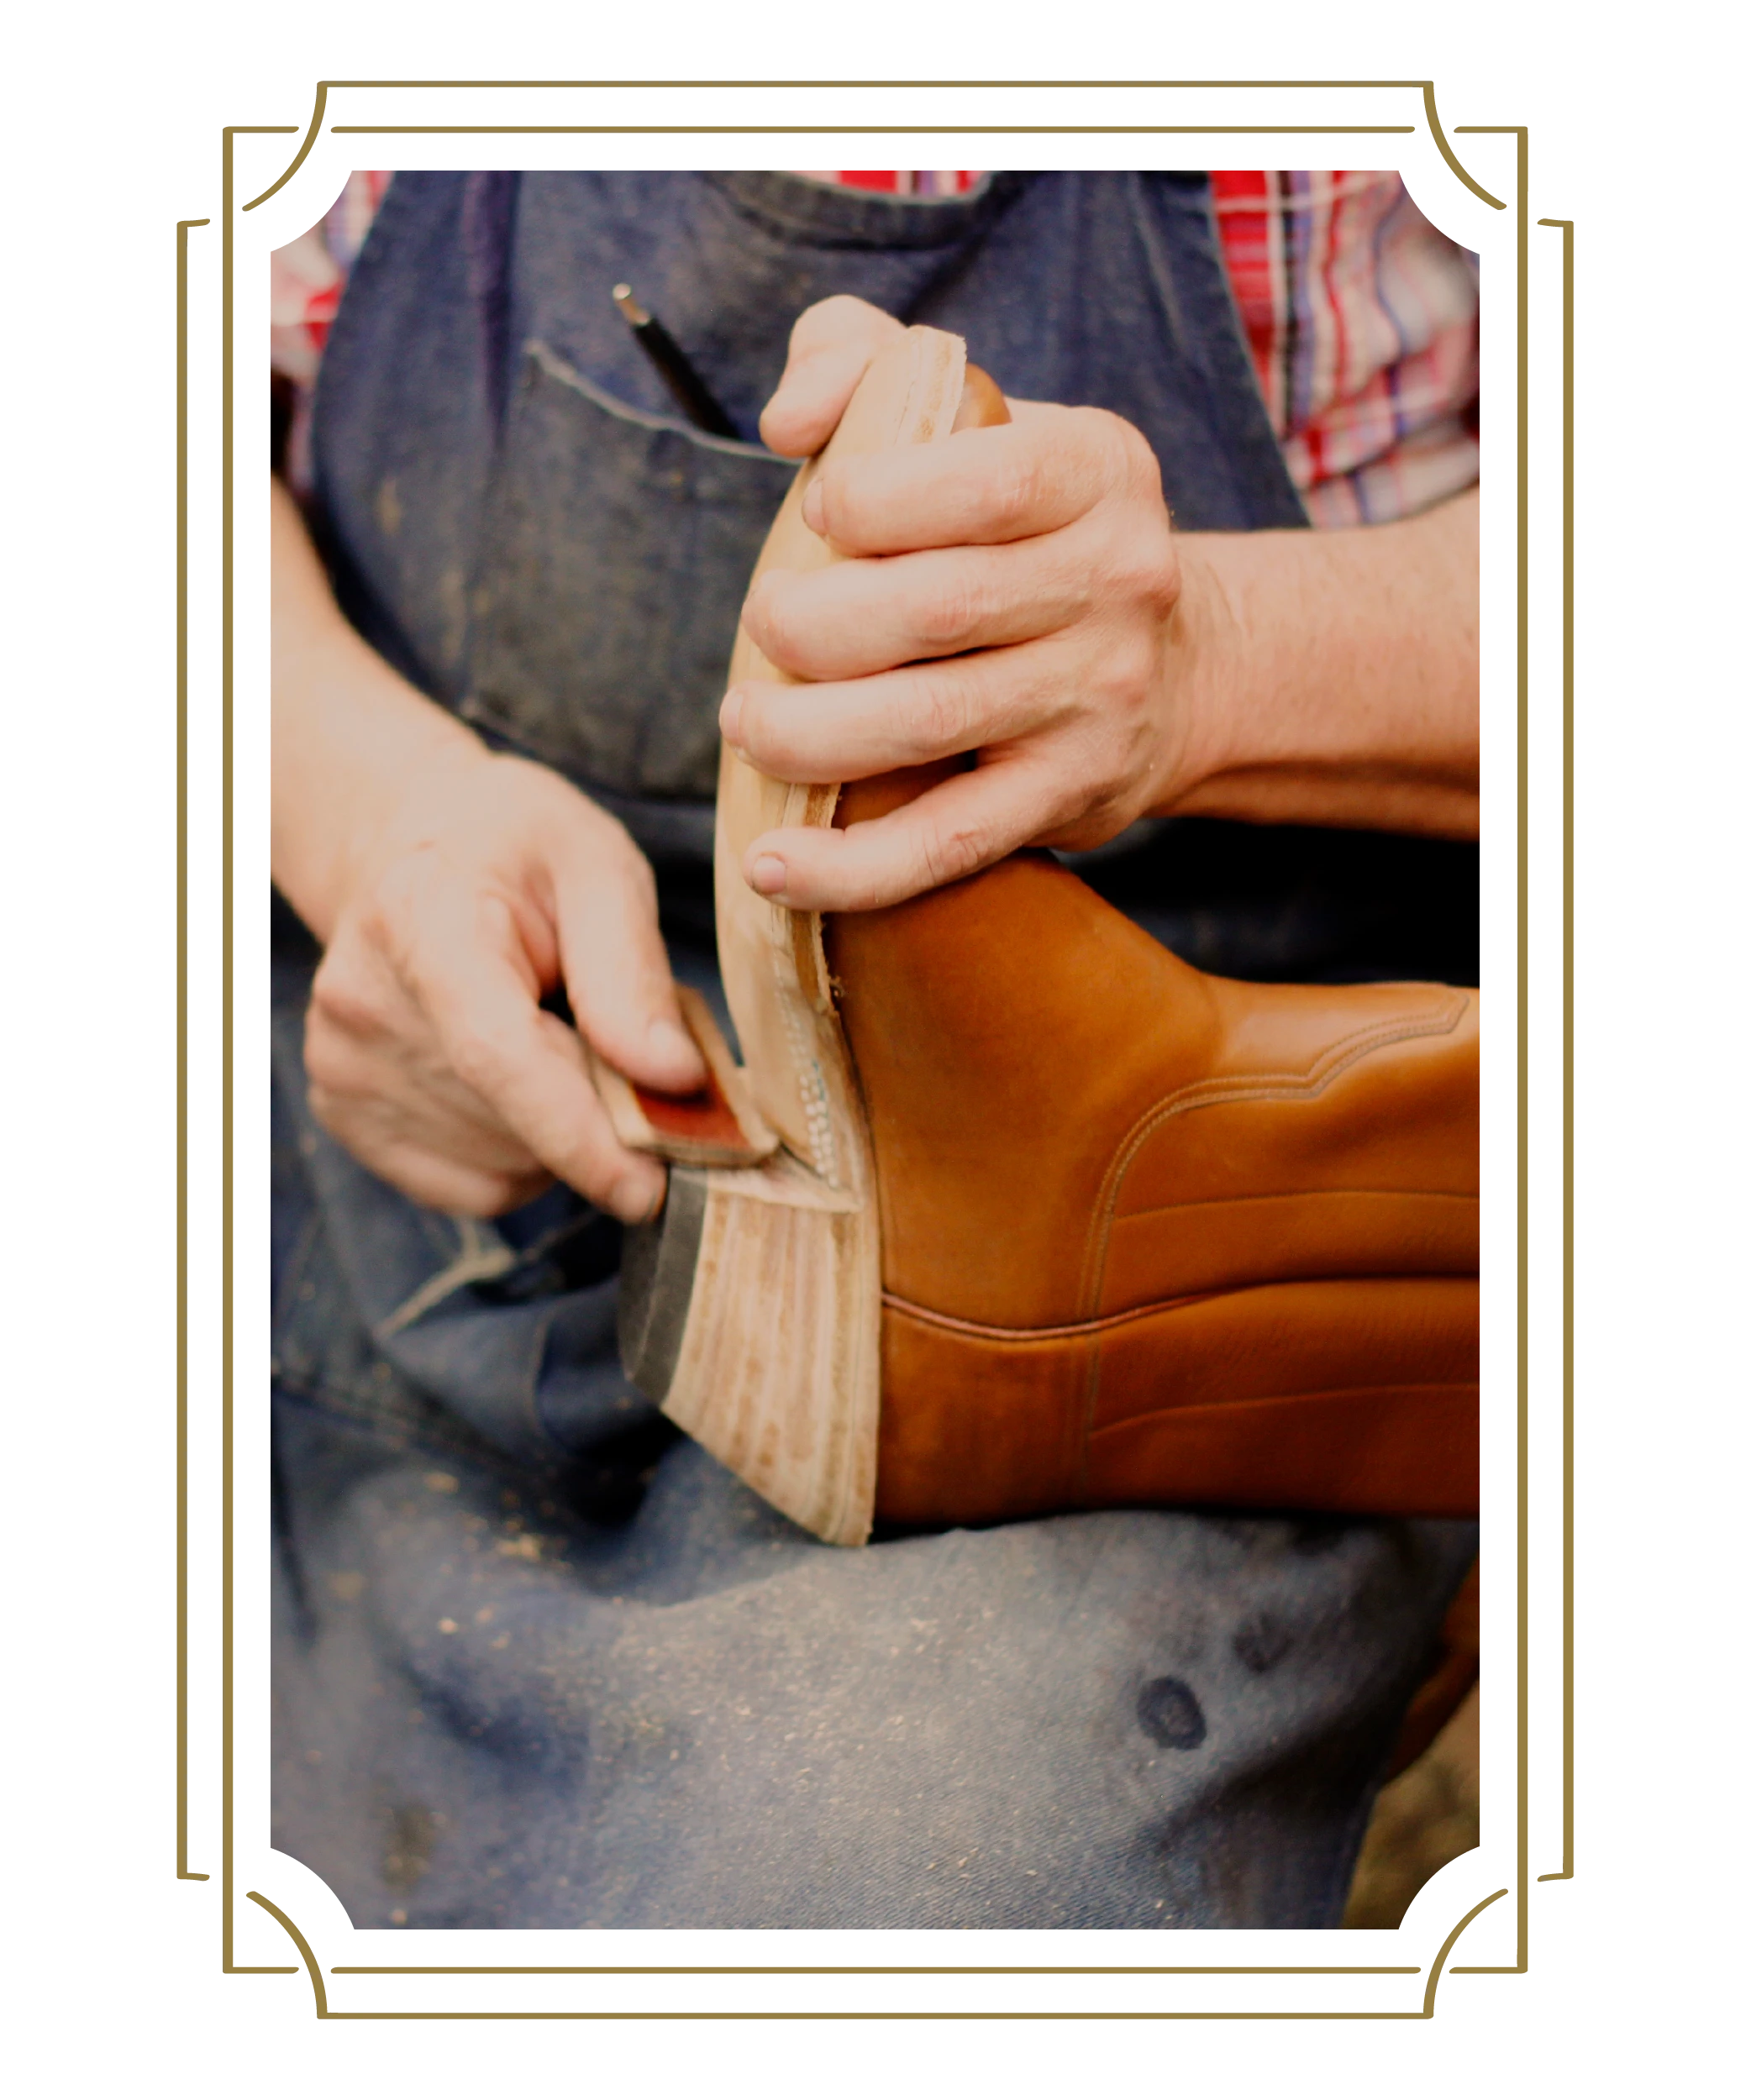 A person in a blue apron is taking care of a pair of homemade cowboy boots.